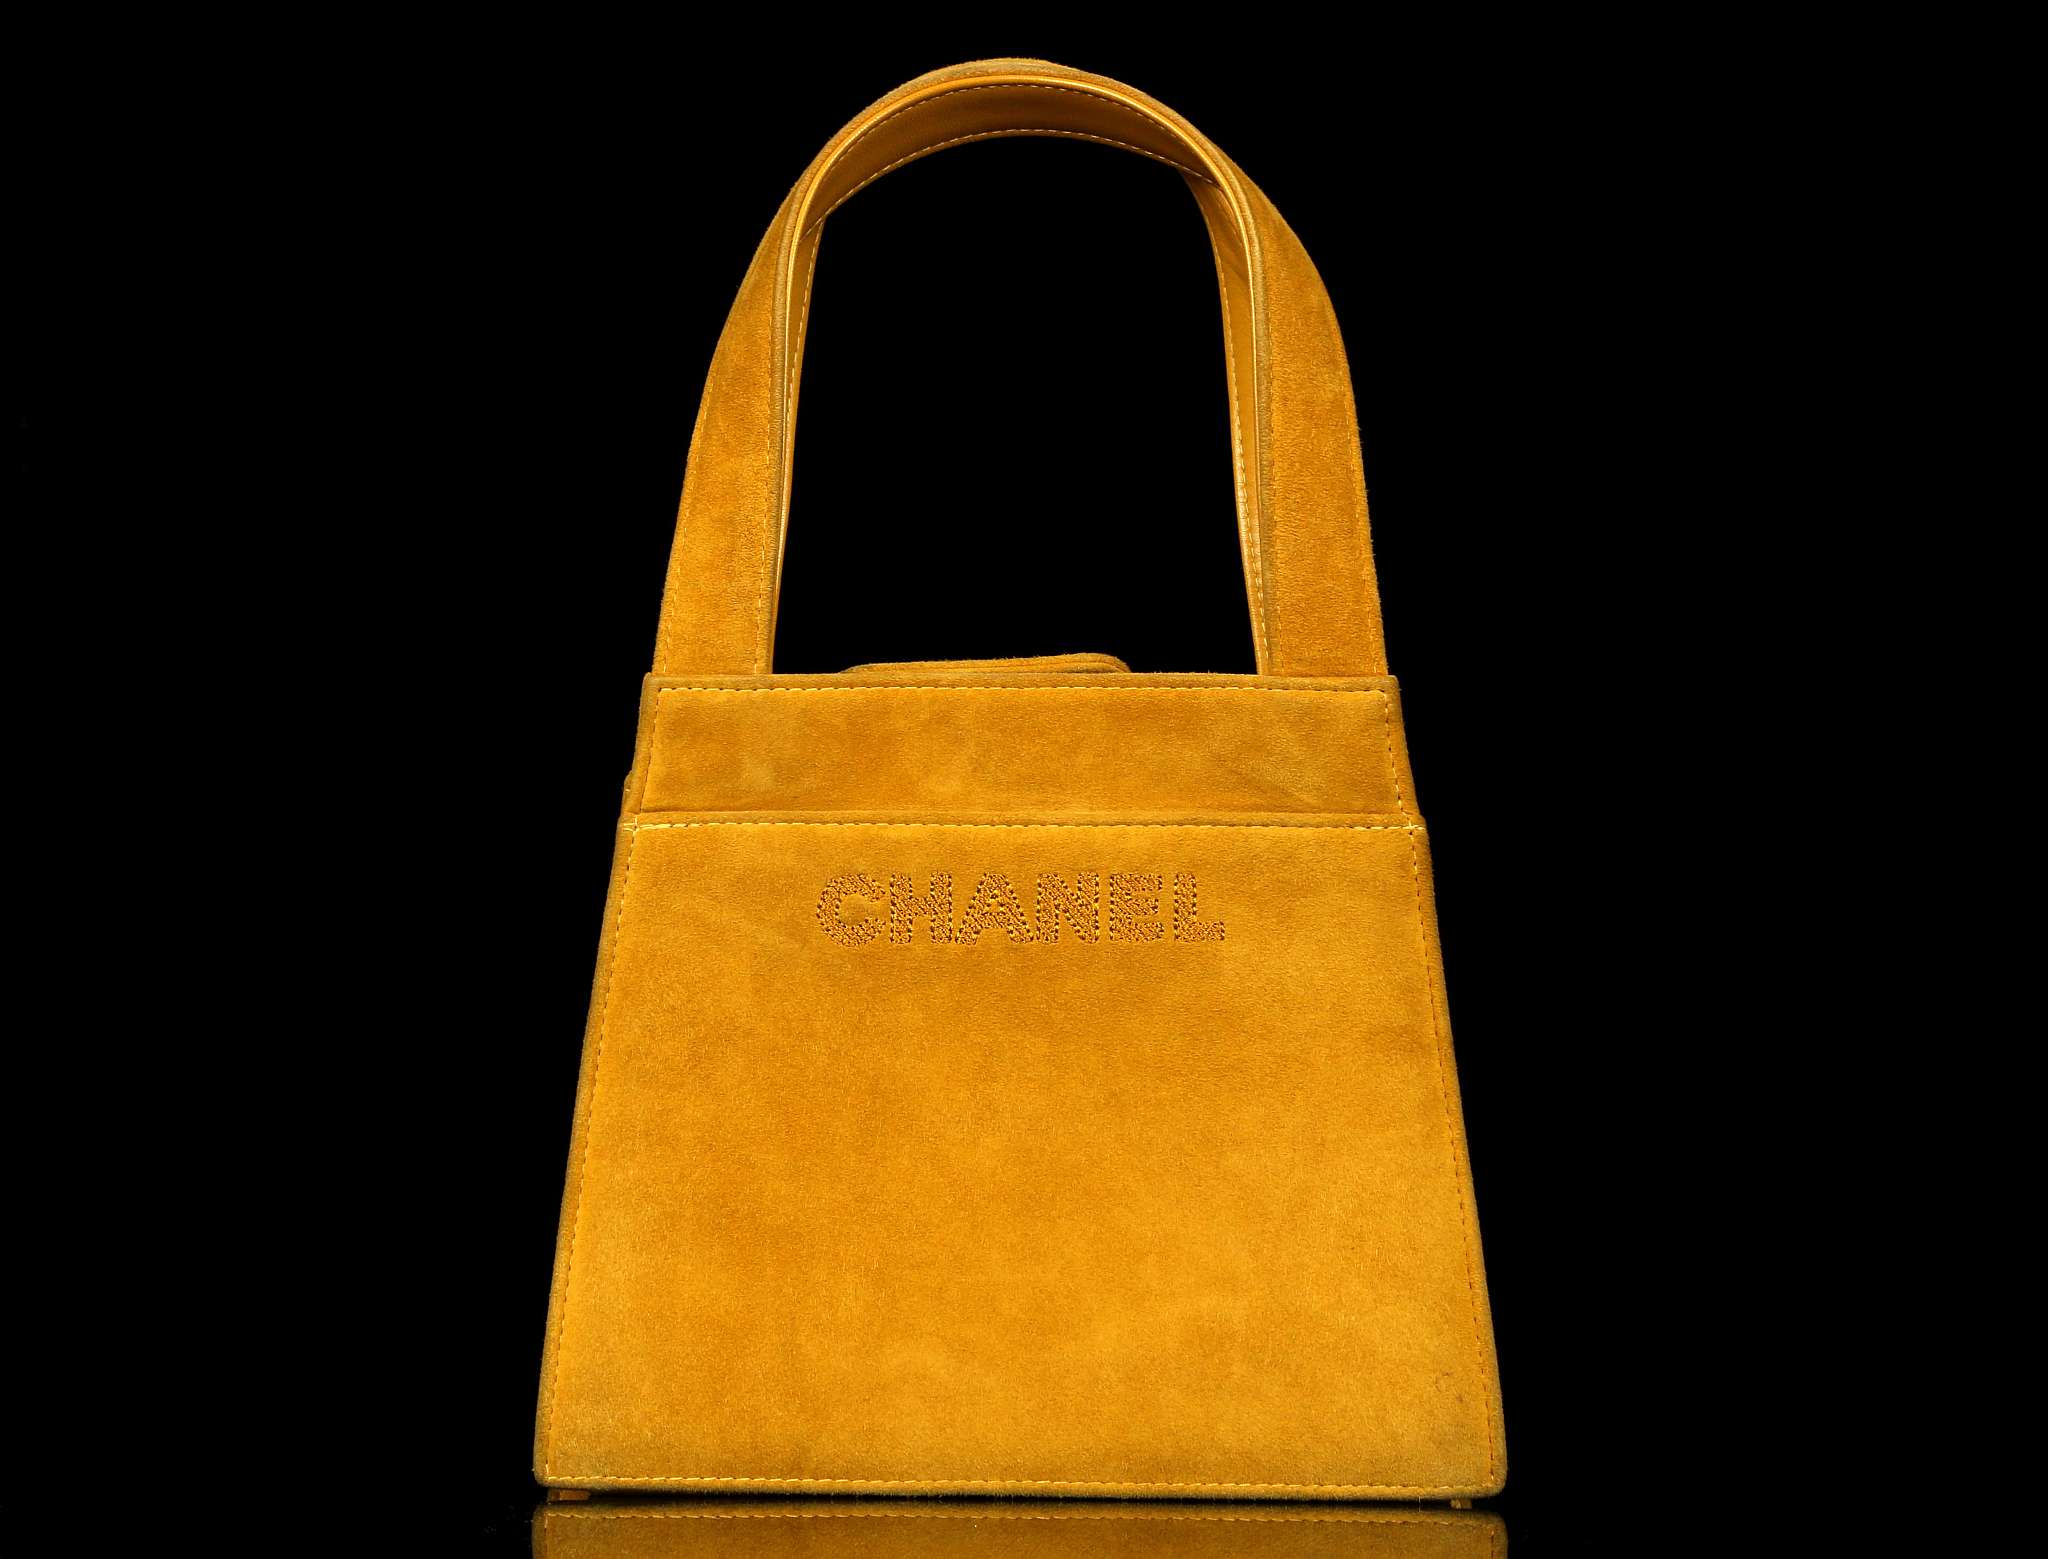 CHANEL EVENING BAG, date code for 1998, mustard ye - Image 2 of 8